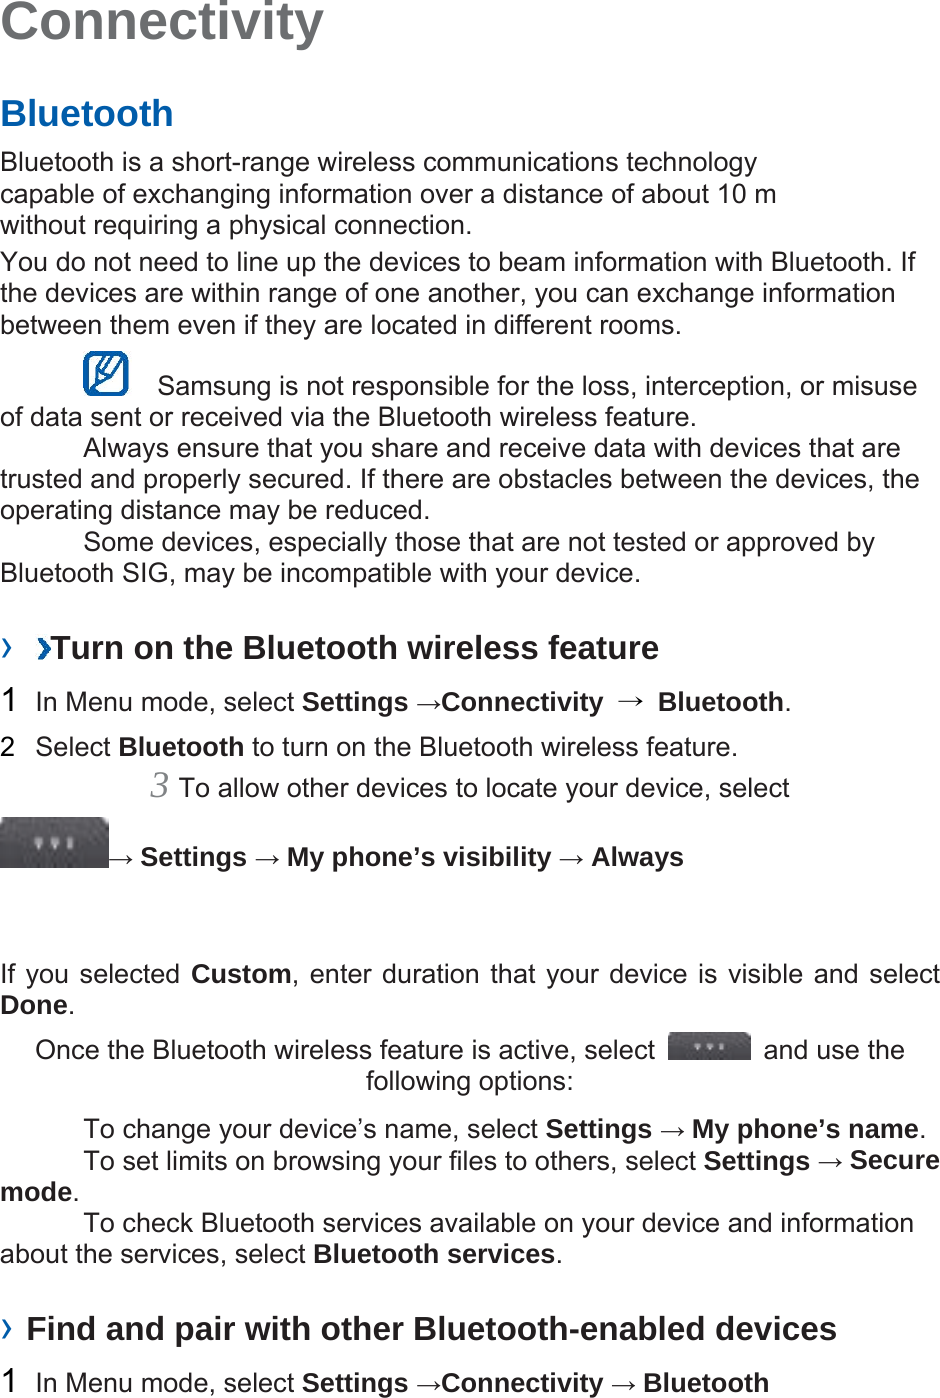 Connectivity   Bluetooth   Bluetooth is a short-range wireless communications technology capable of exchanging information over a distance of about 10 m without requiring a physical connection.   You do not need to line up the devices to beam information with Bluetooth. If the devices are within range of one another, you can exchange information between them even if they are located in different rooms.      Samsung is not responsible for the loss, interception, or misuse of data sent or received via the Bluetooth wireless feature.     Always ensure that you share and receive data with devices that are trusted and properly secured. If there are obstacles between the devices, the operating distance may be reduced.     Some devices, especially those that are not tested or approved by Bluetooth SIG, may be incompatible with your device.    ›  Turn on the Bluetooth wireless feature   1  In Menu mode, select Settings →Connectivity  → Bluetooth.  2  Select Bluetooth to turn on the Bluetooth wireless feature.   3 To allow other devices to locate your device, select   → Settings → My phone’s visibility → Always   If you selected Custom, enter duration that your device is visible and select Done.  Once the Bluetooth wireless feature is active, select    and use the following options:     To change your device’s name, select Settings → My phone’s name.    To set limits on browsing your files to others, select Settings → Secure mode.    To check Bluetooth services available on your device and information about the services, select Bluetooth services.   › Find and pair with other Bluetooth-enabled devices   1  In Menu mode, select Settings →Connectivity → Bluetooth 